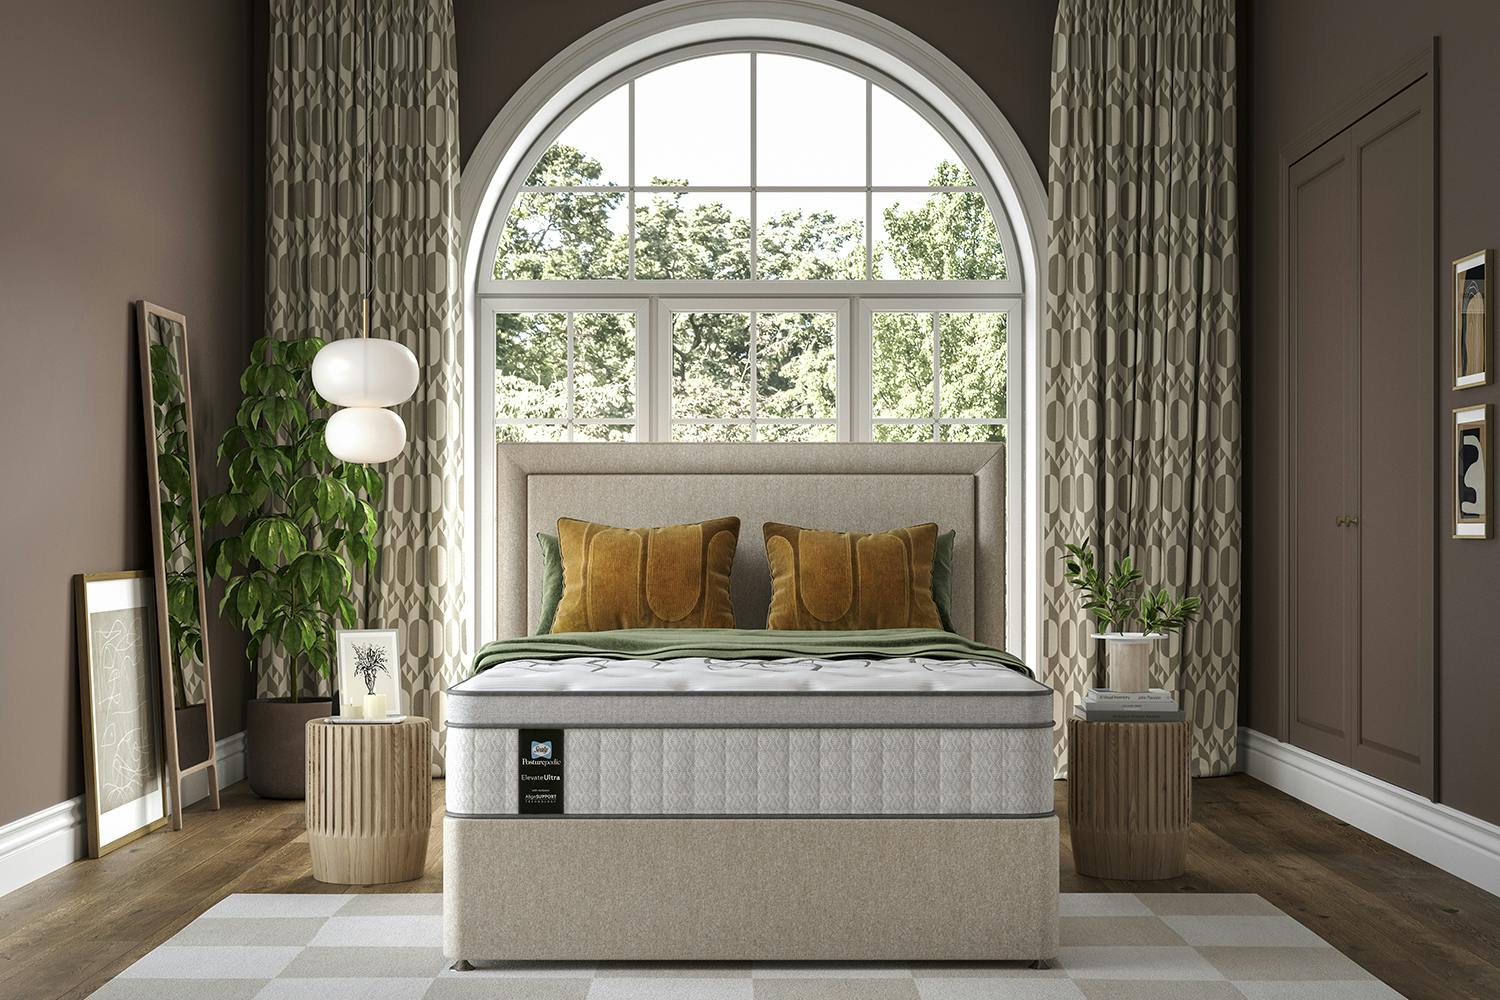 Sealy | Altair Motion Mattress | Double | 4ft6